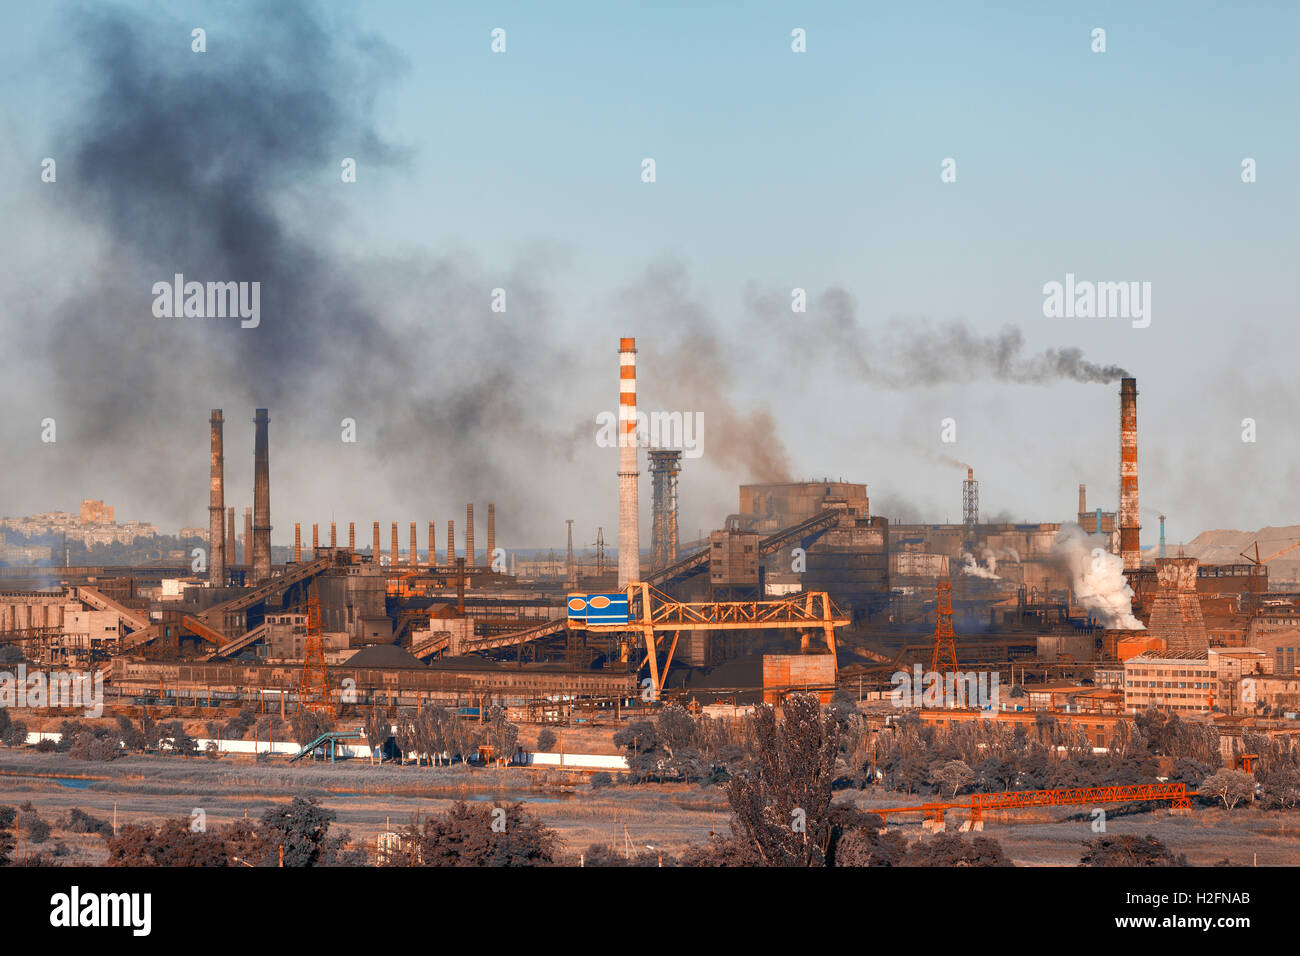 Steel mill, Metallurgy plant. Heavy industry. Steel factory with smog. Pipes with black smoke. Metallurgical plant. steel works, Stock Photo